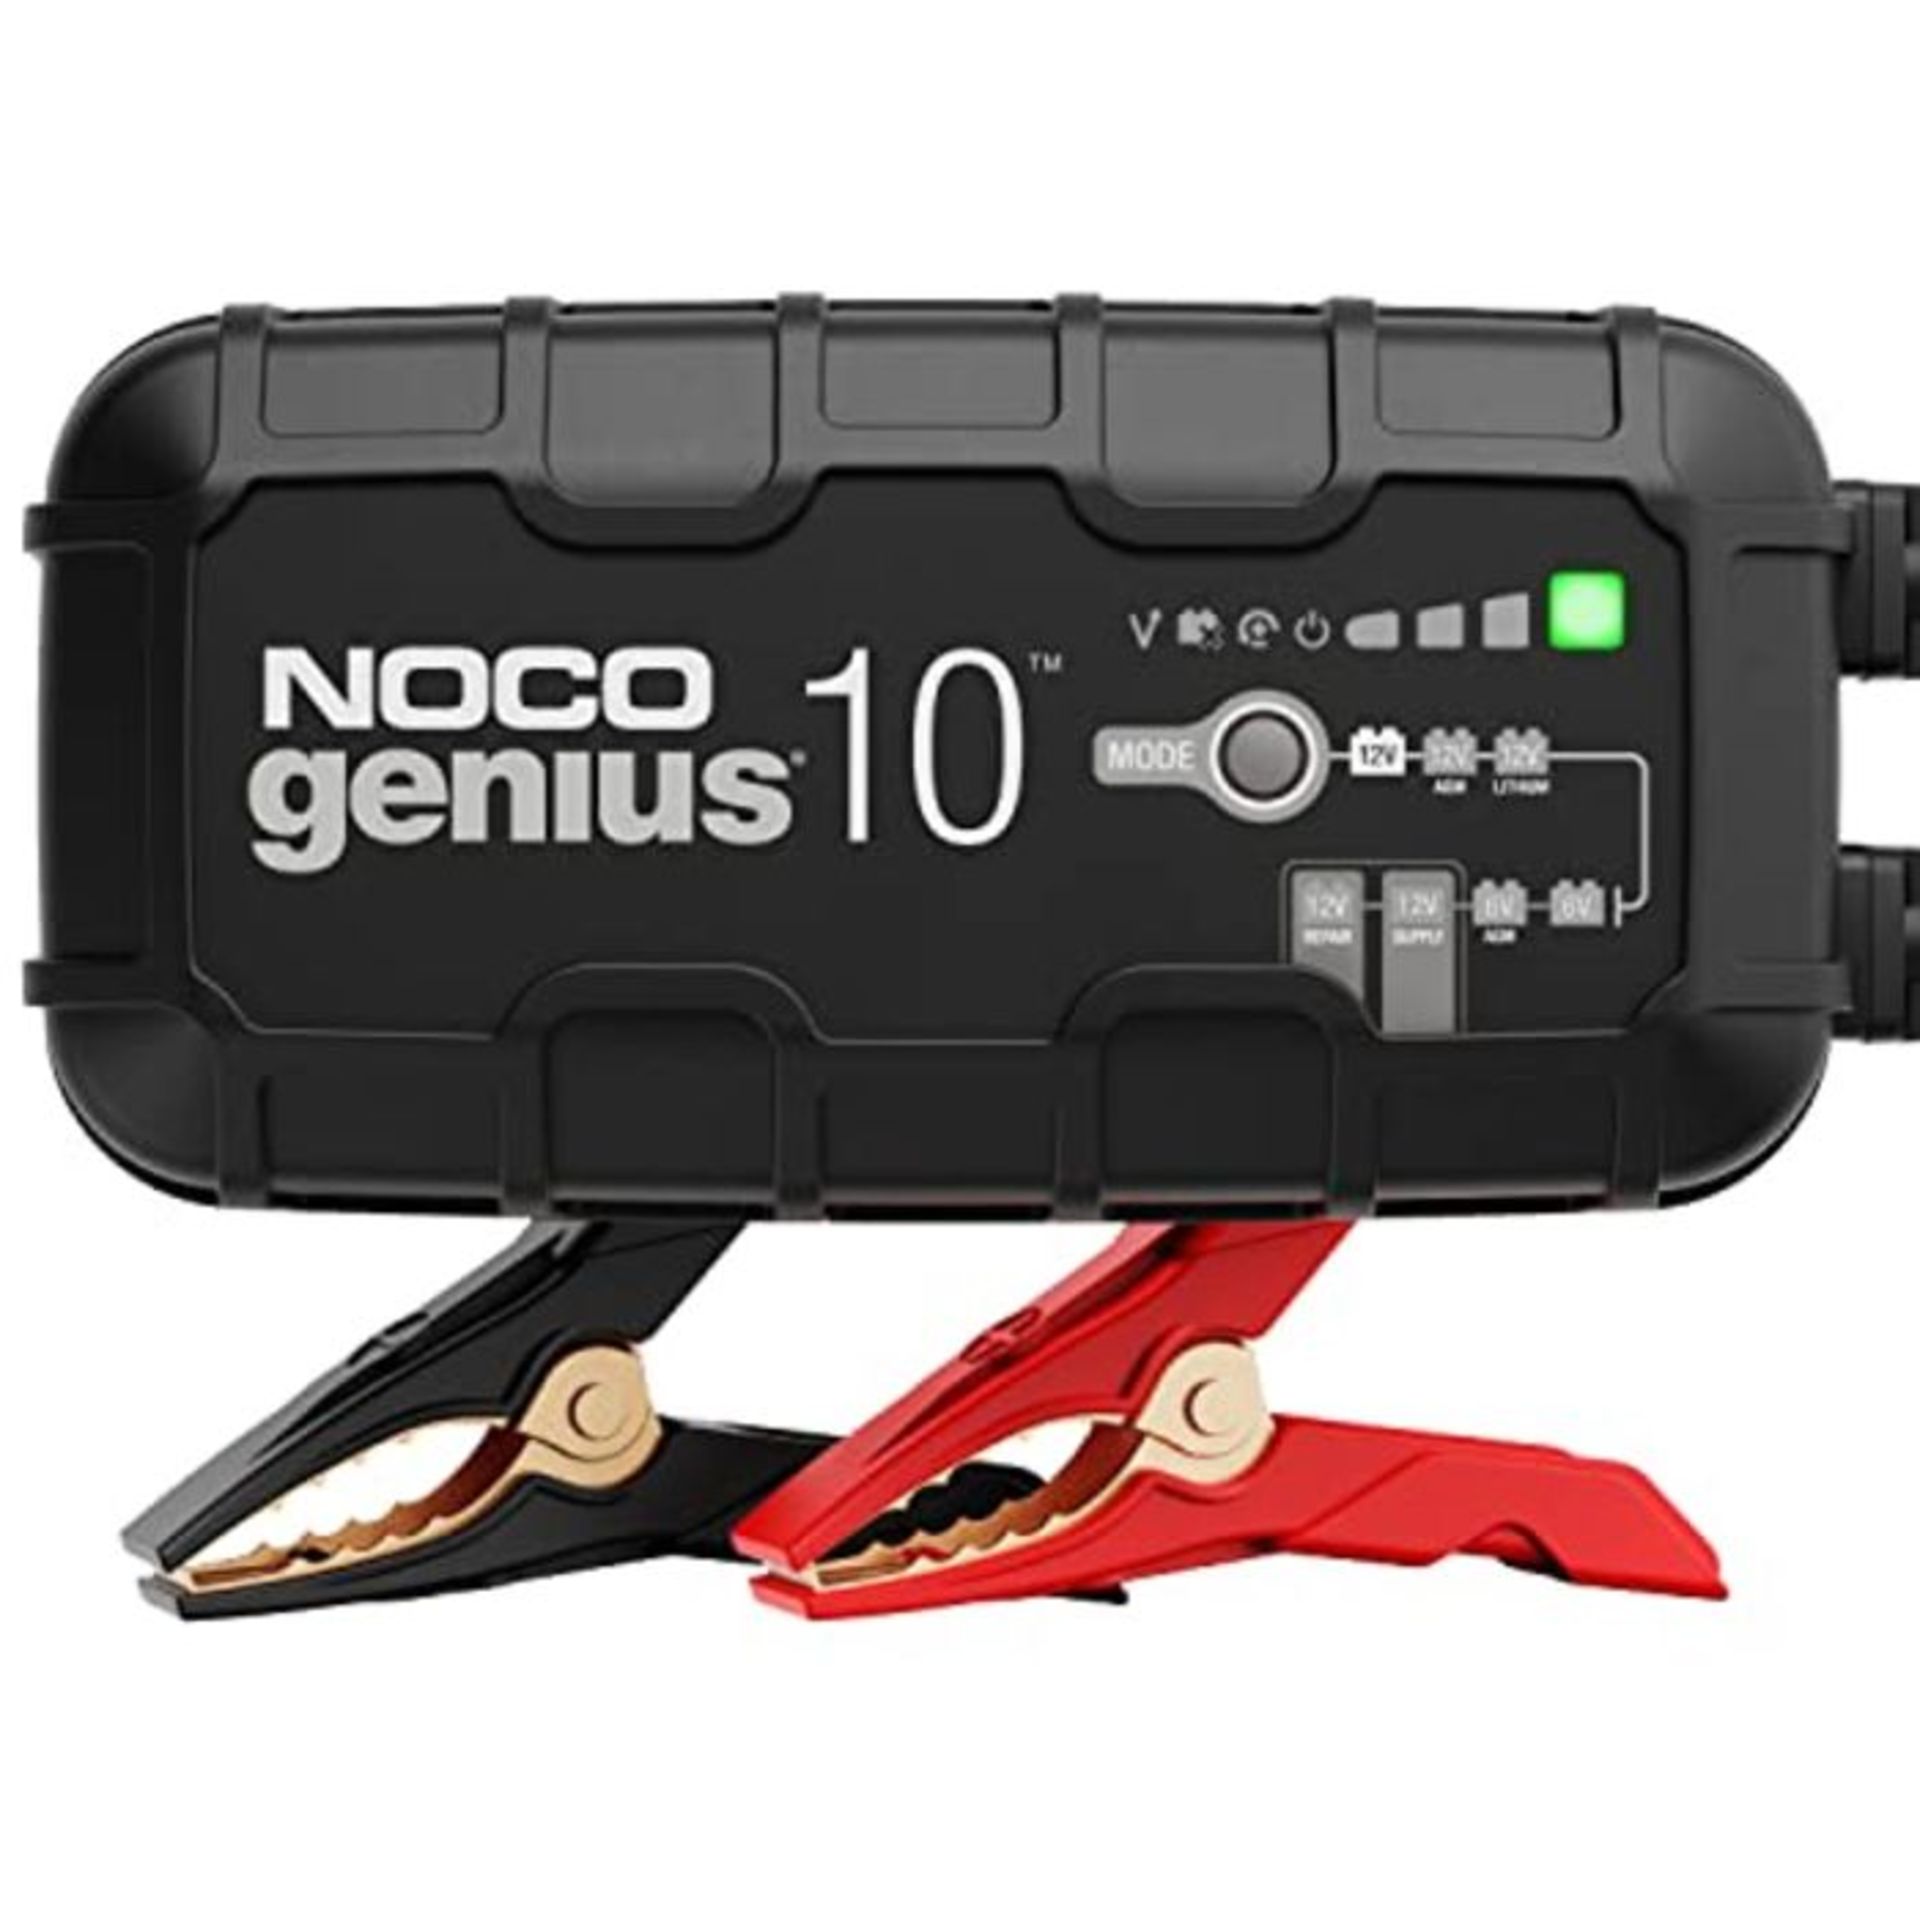 RRP £129.00 NOCO GENIUS10UK, 10A Smart Car Charger, 6V and 12V Portable Heavy-Duty Battery Charger